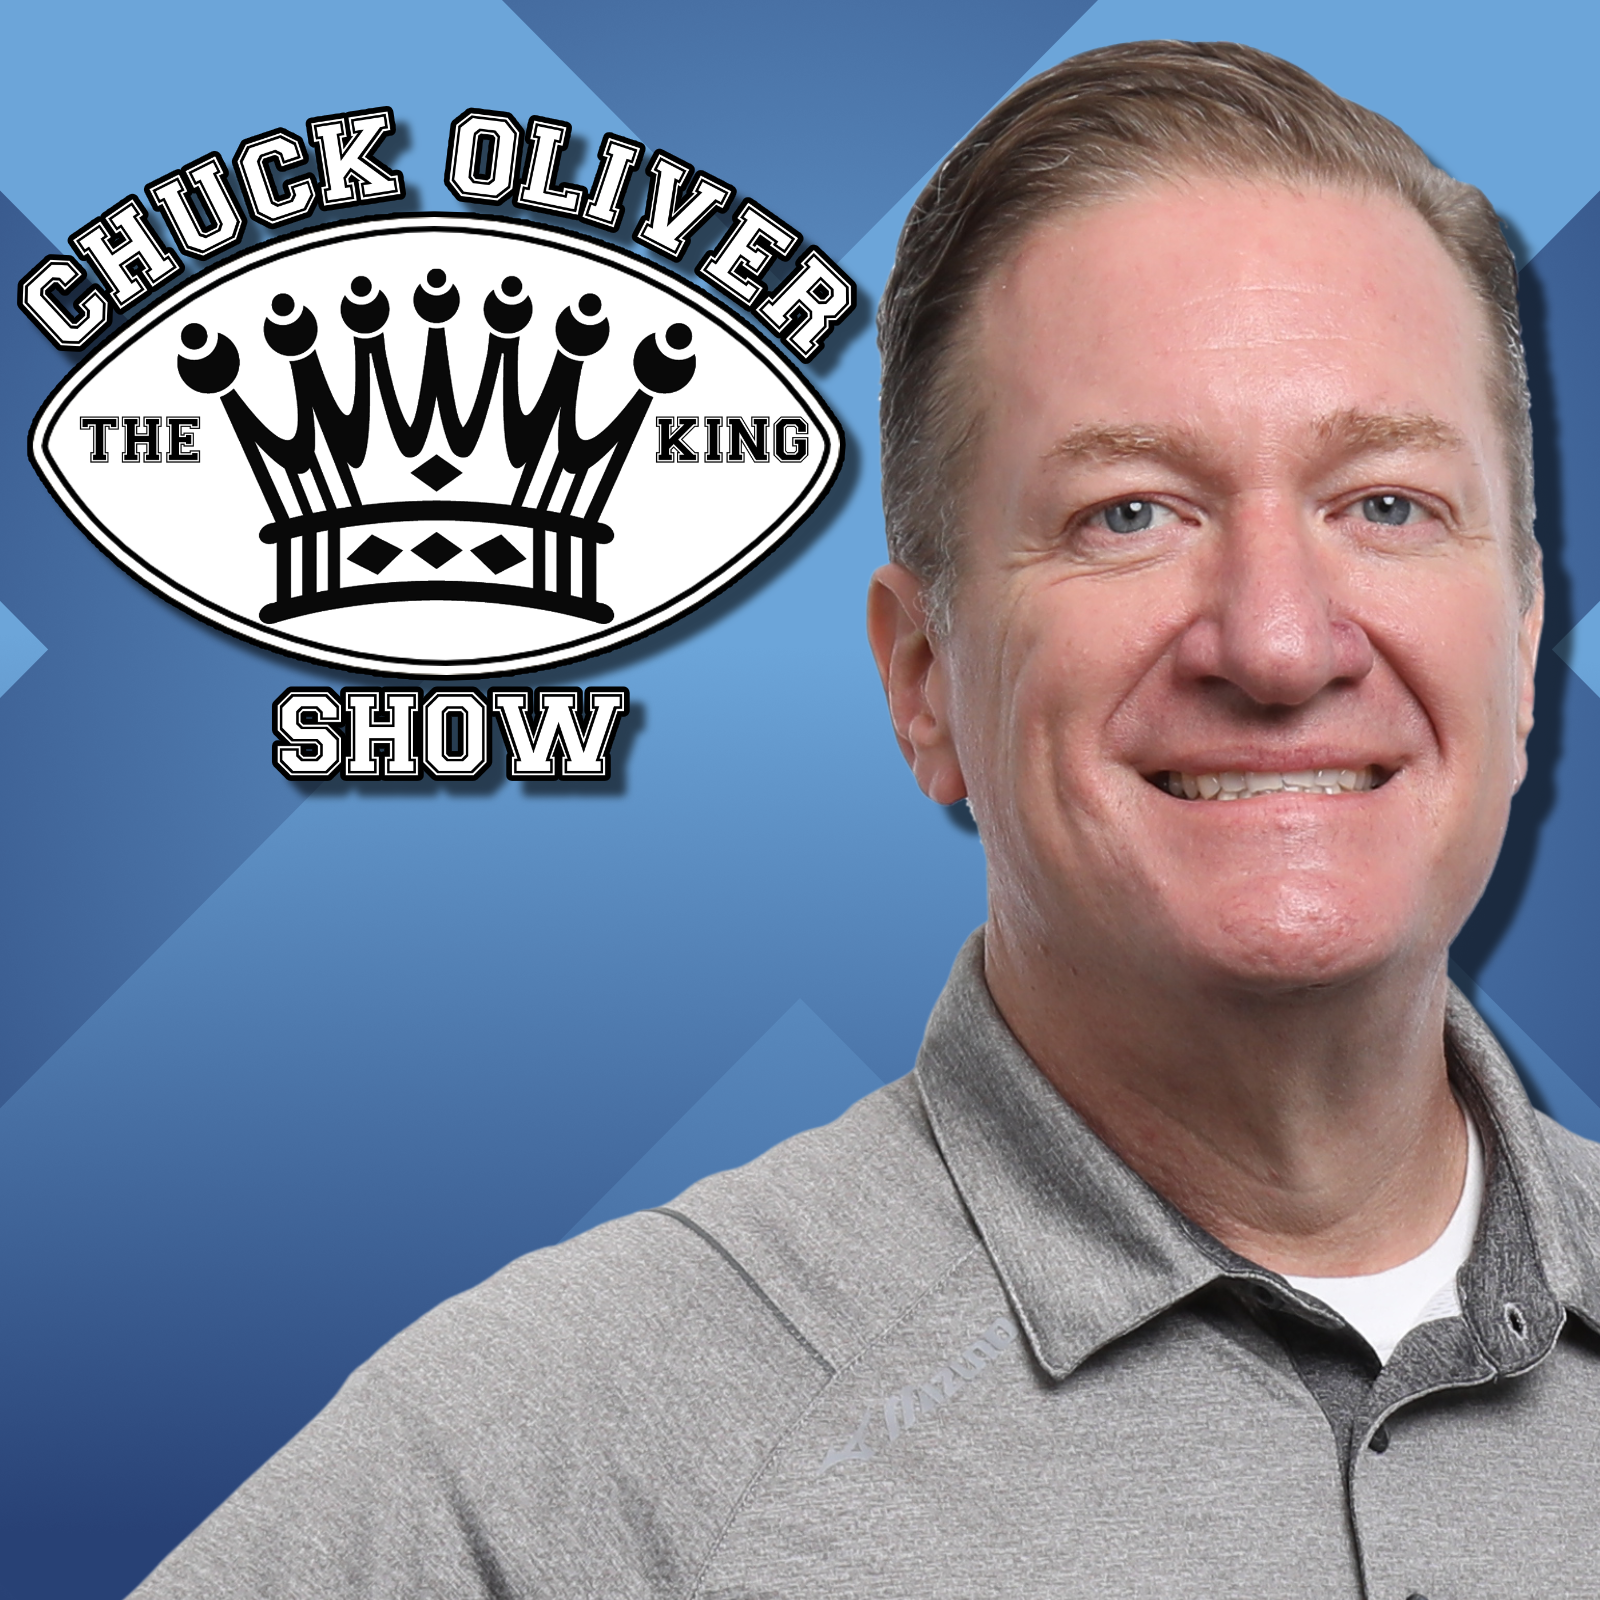 CHUCK OLIVER SHOW 5-24 FRIDAY HOUR 2